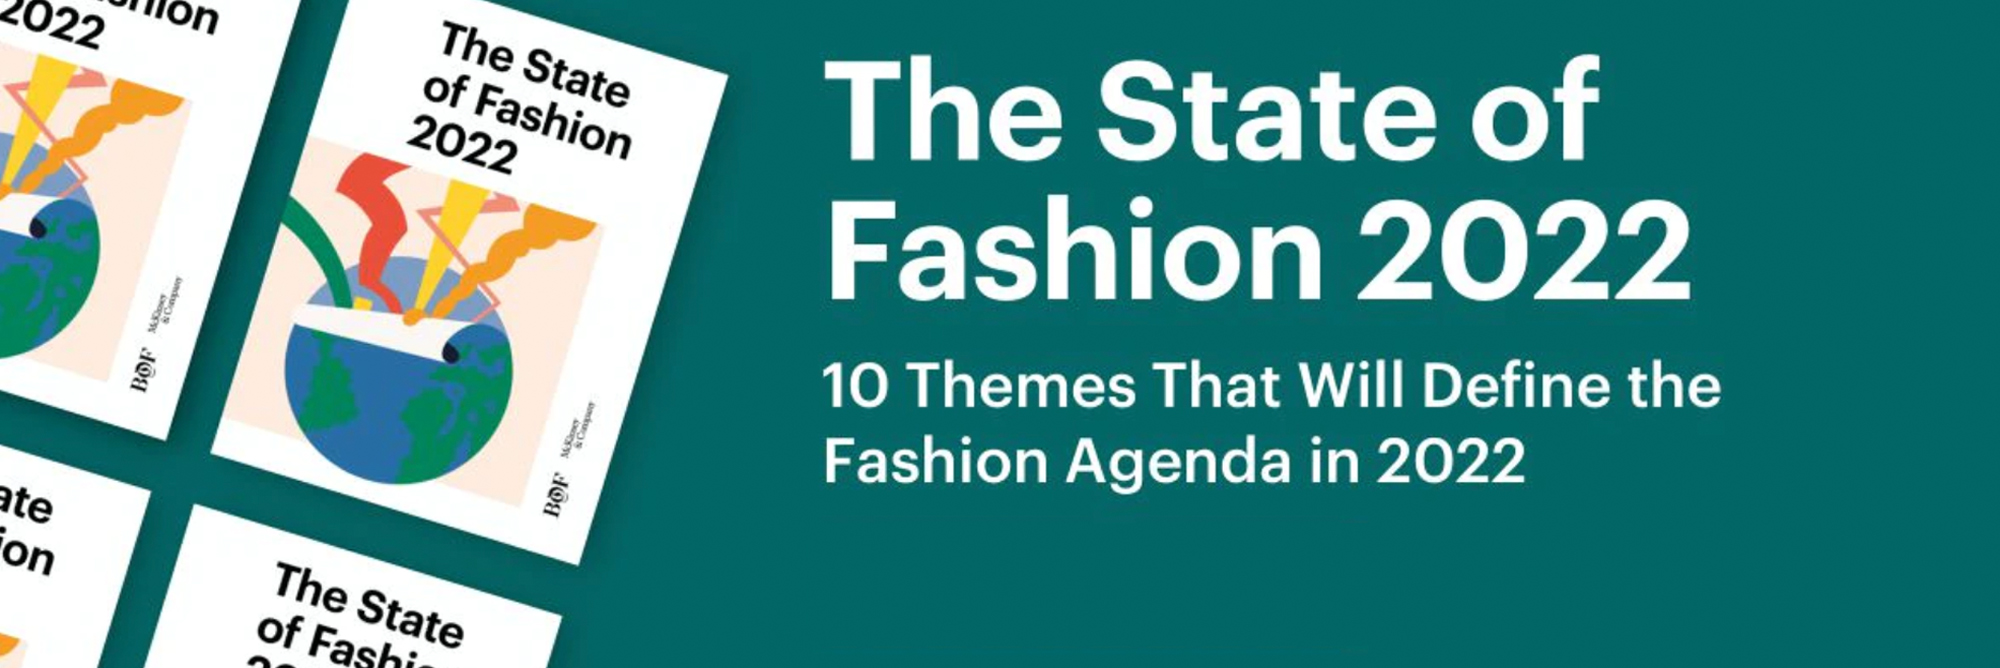 The State of Fashion 2022 – this is what the fashion industry expects